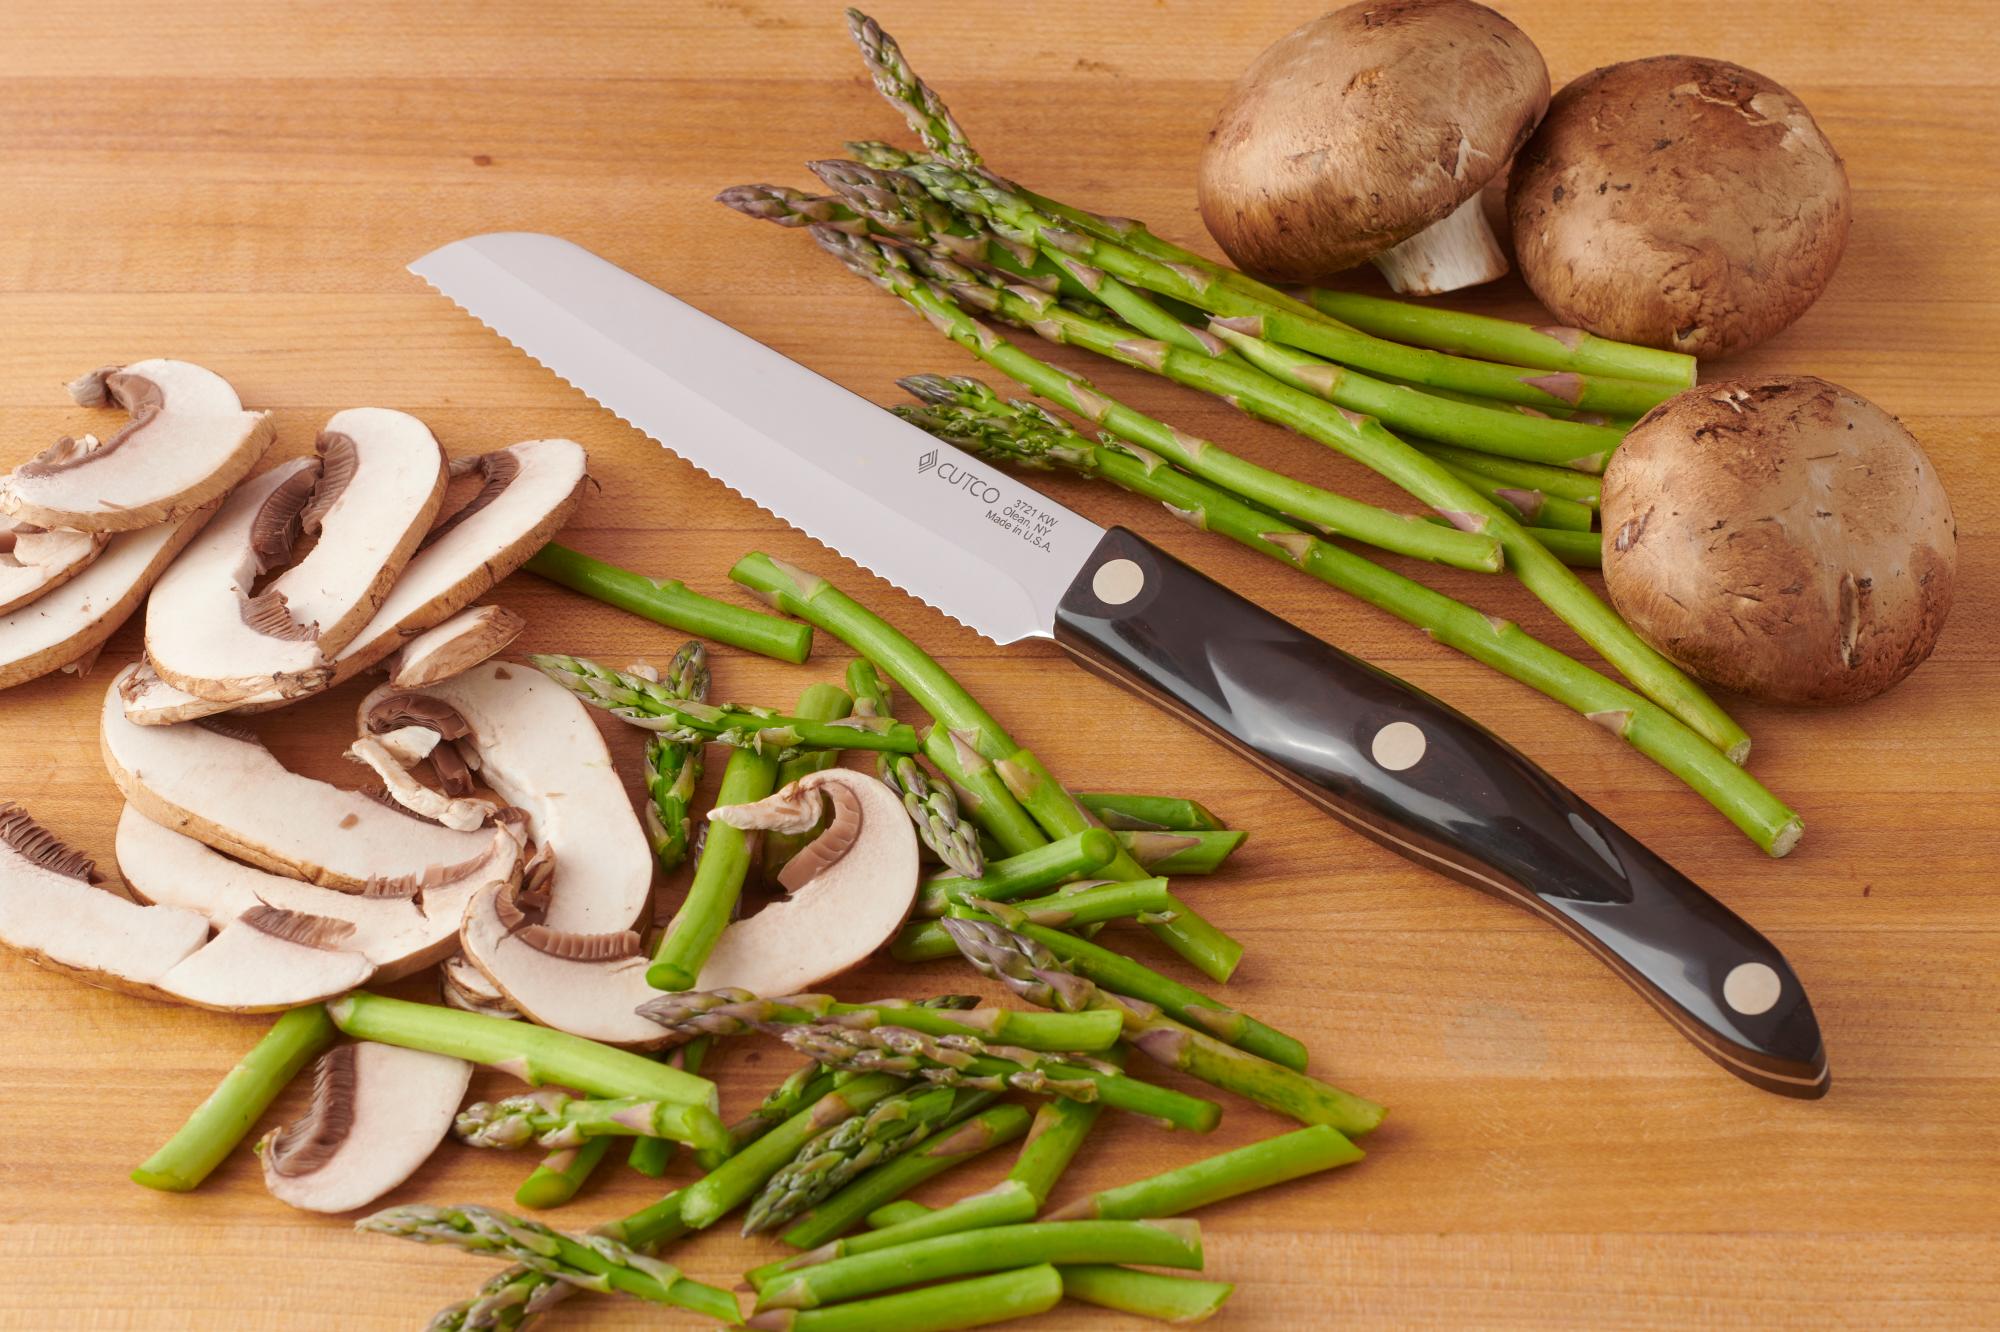 A Santoku-Style Trimmer with the mushrooms and asparagus.